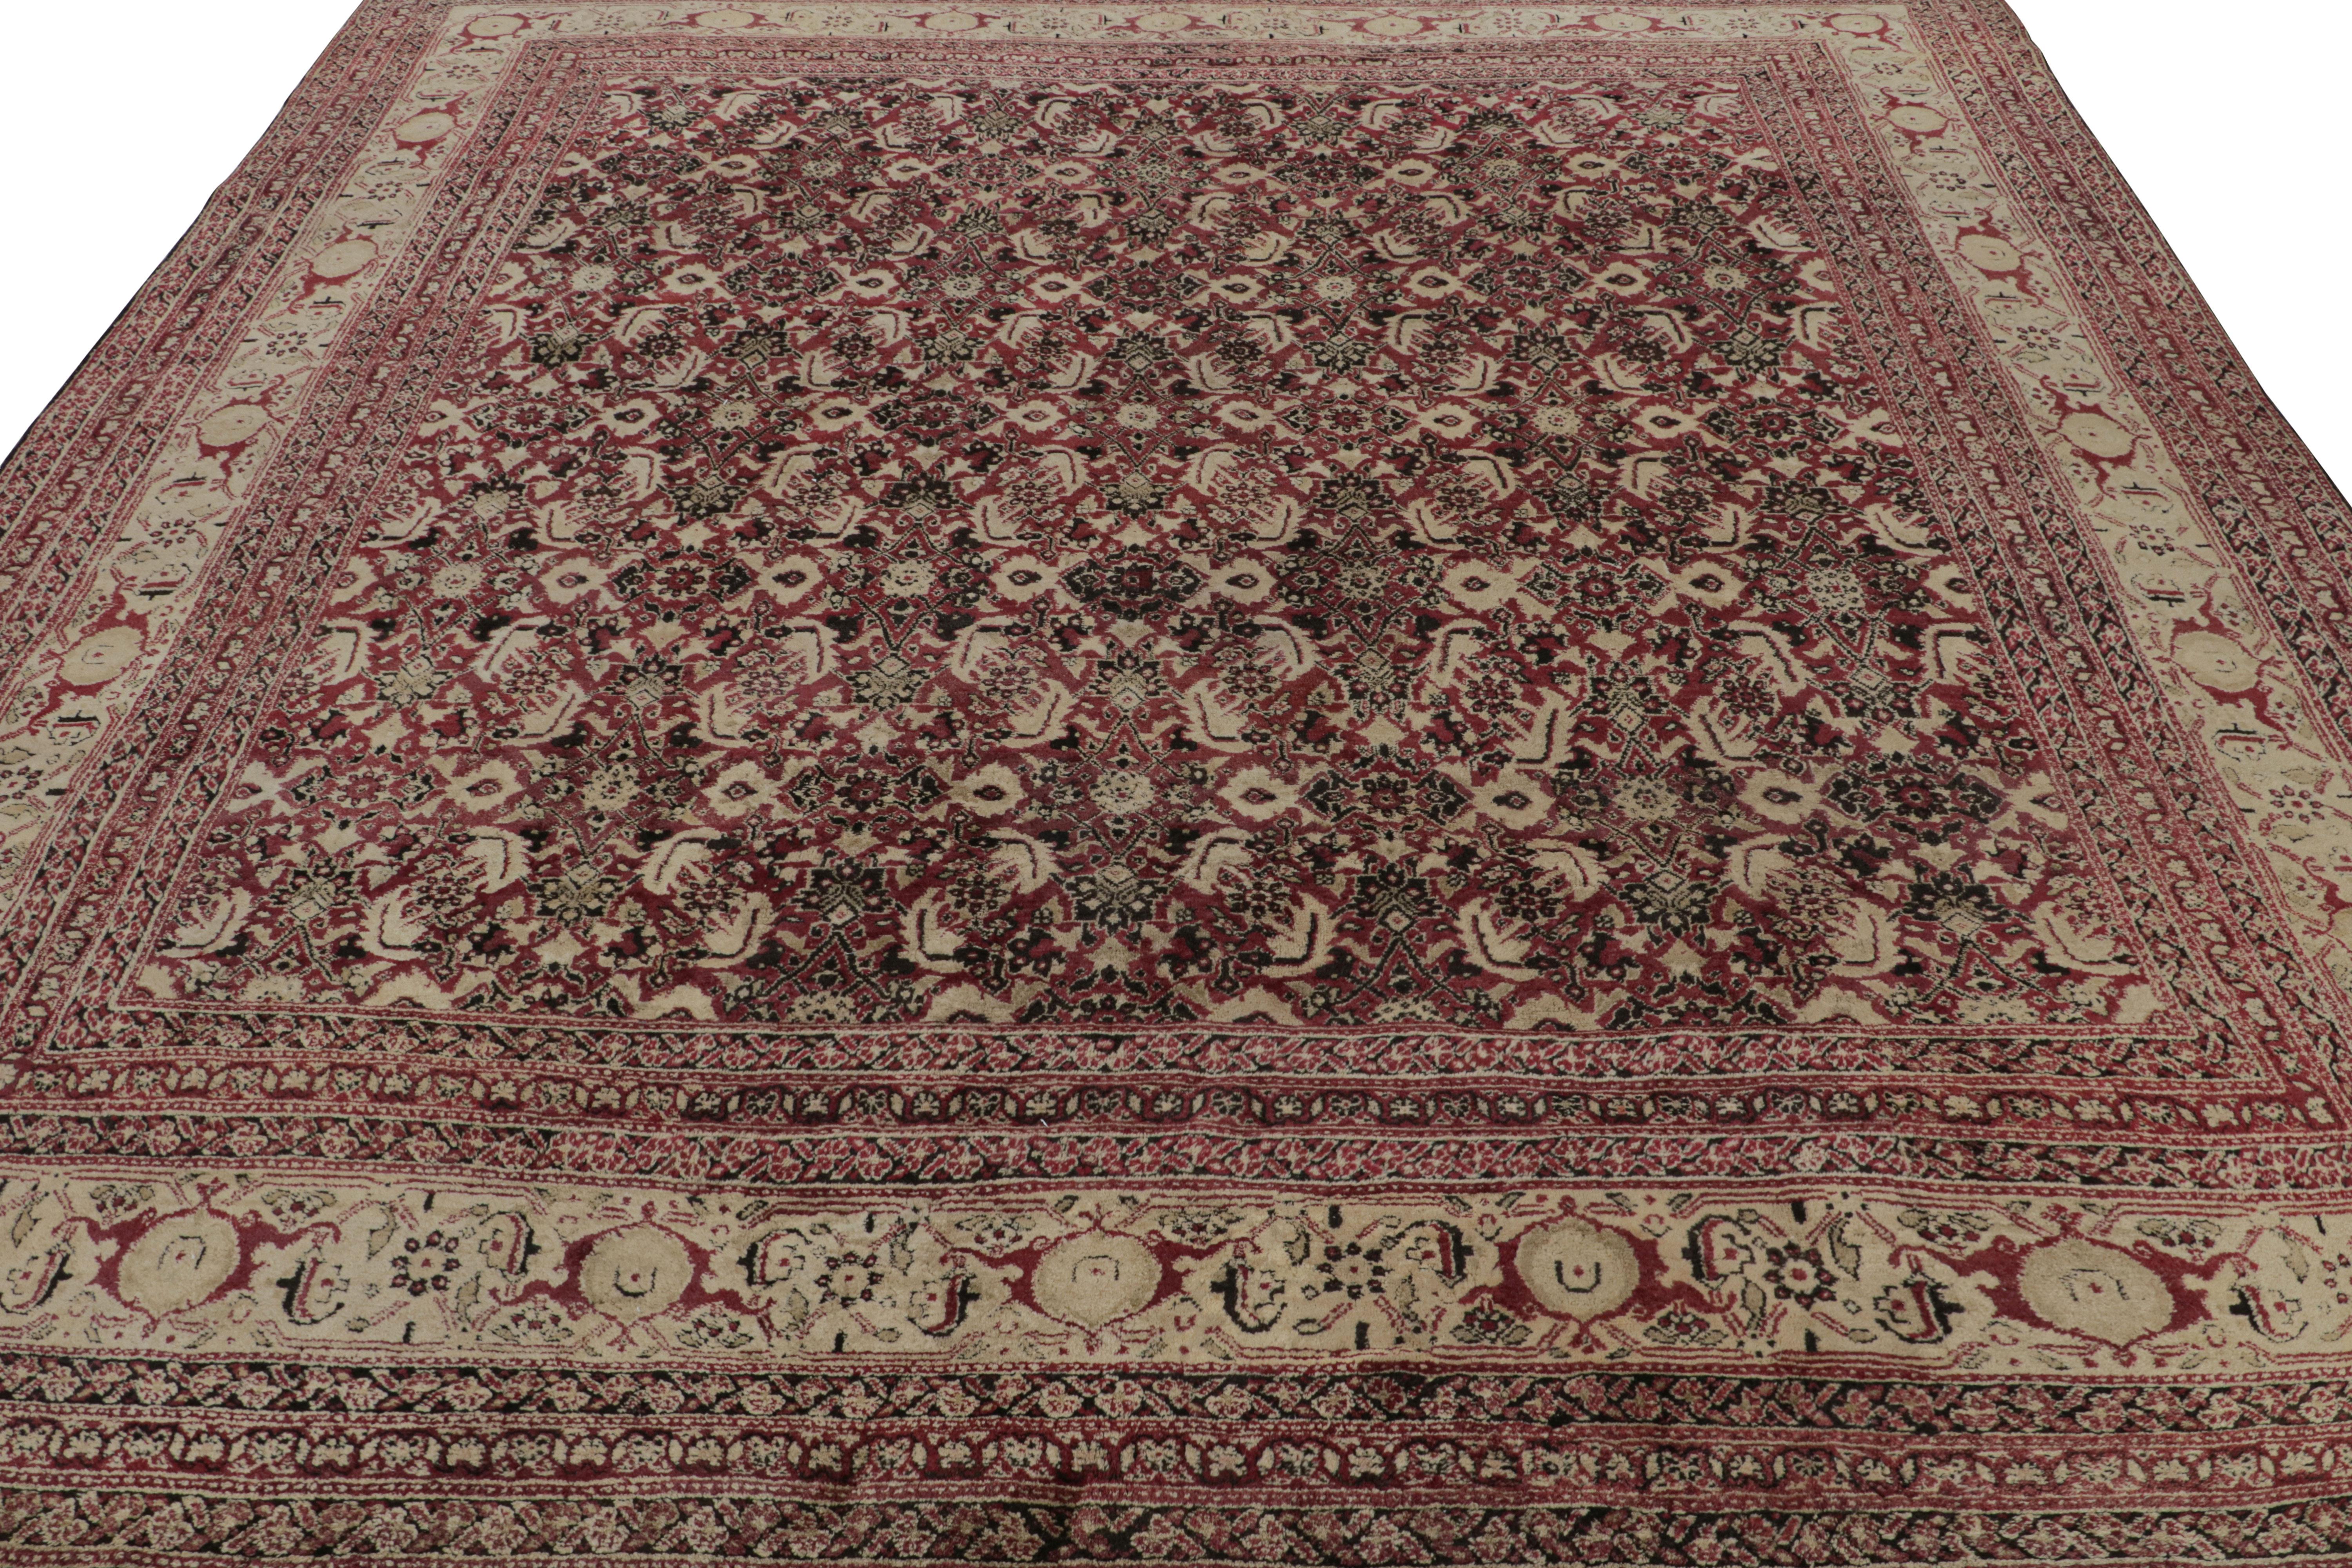 Indian Antique Agra Square Rug in Burgundy with Floral Patterns, from Rug & Kilim For Sale